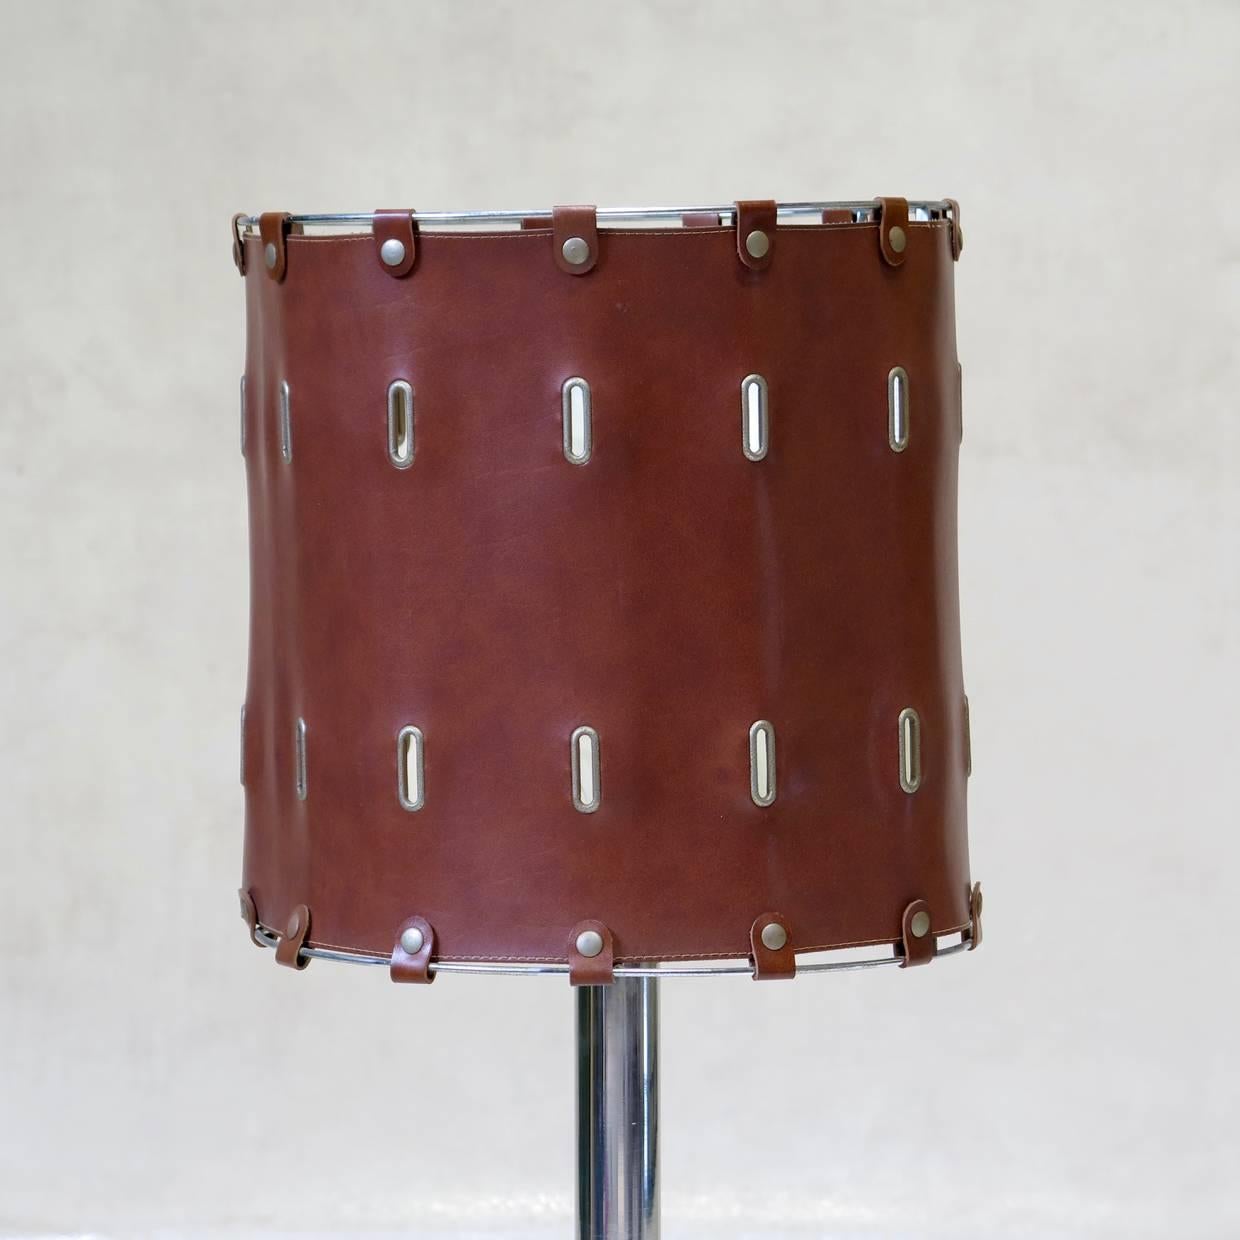 Well-made desk lamp with a chromed base and an imitation leather shade with oblong eyelets.